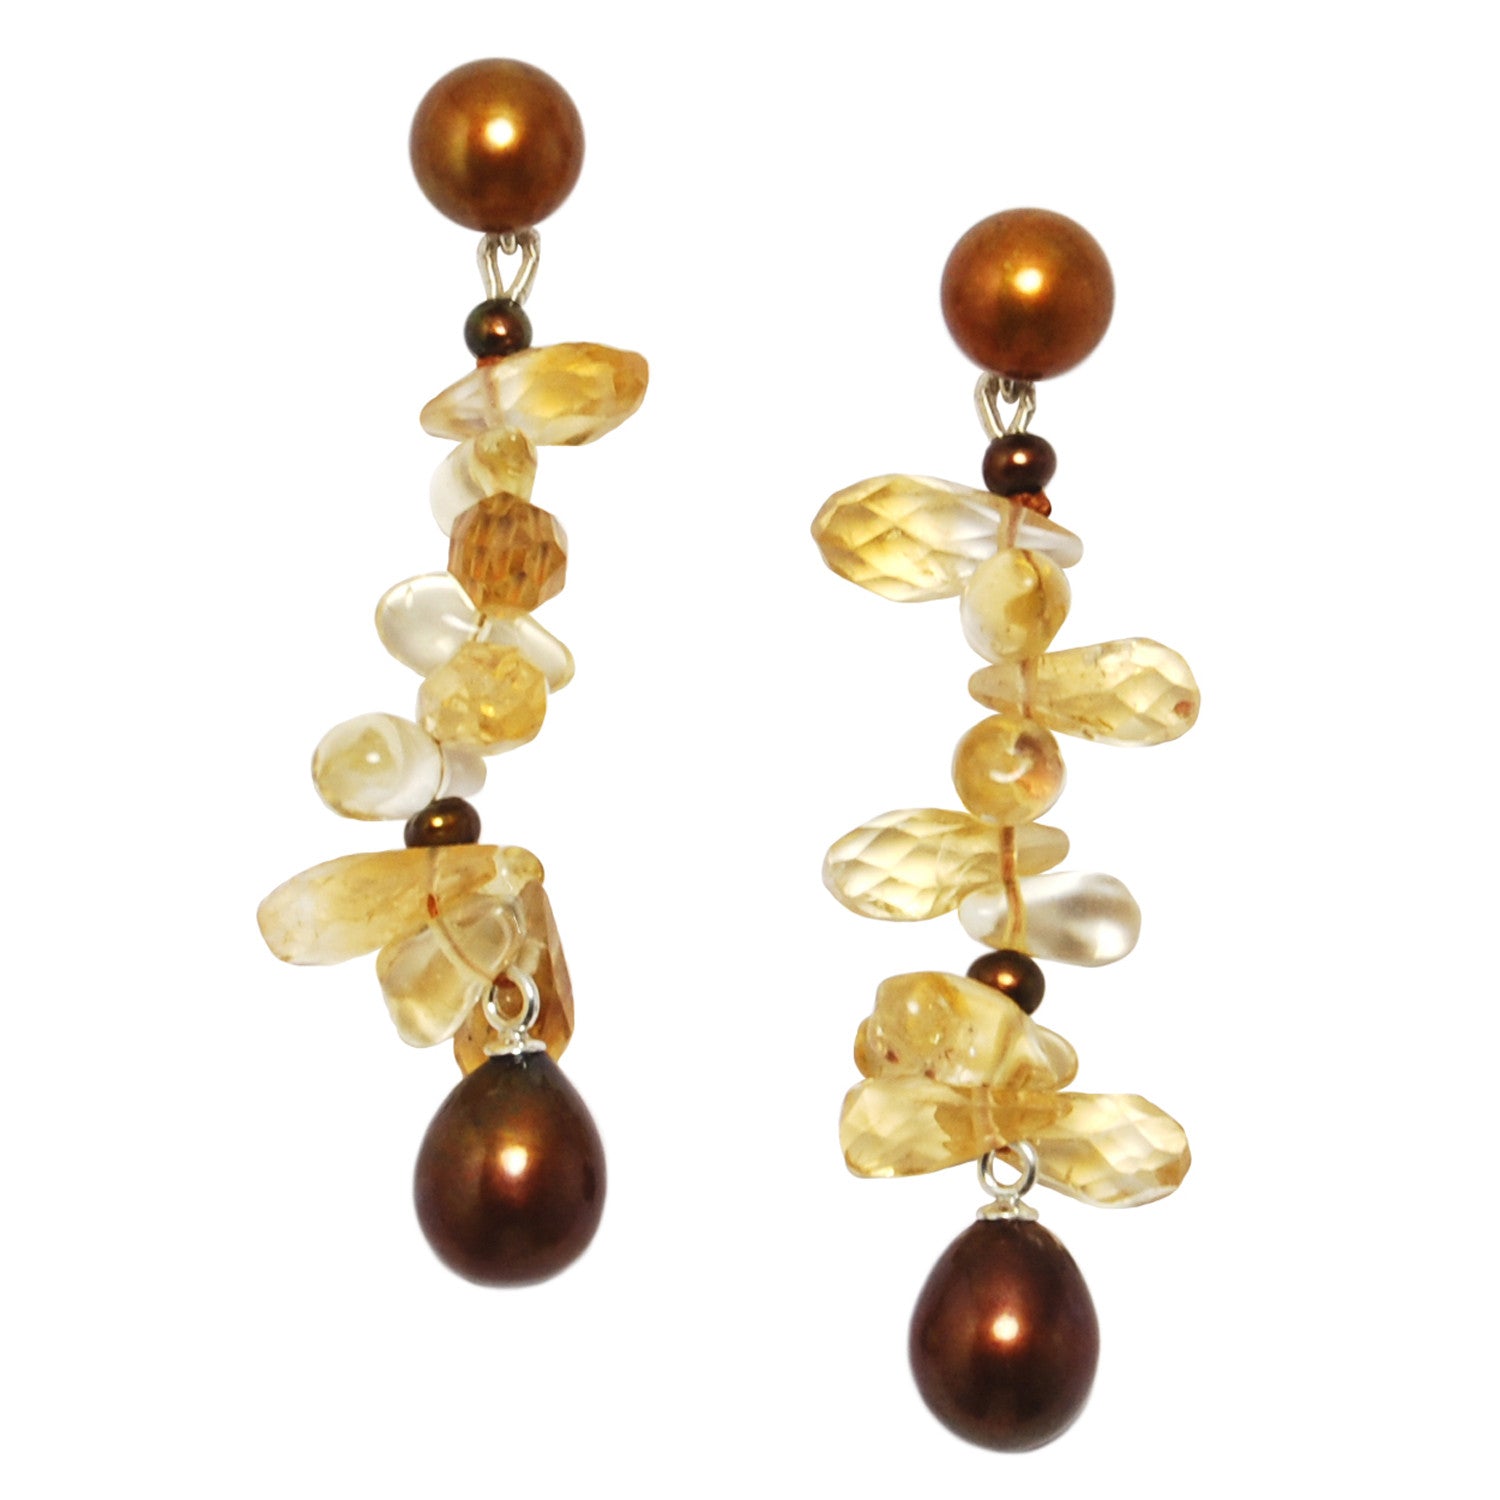 Long 'Twinkling Light' Earrings in Copper and Citrine